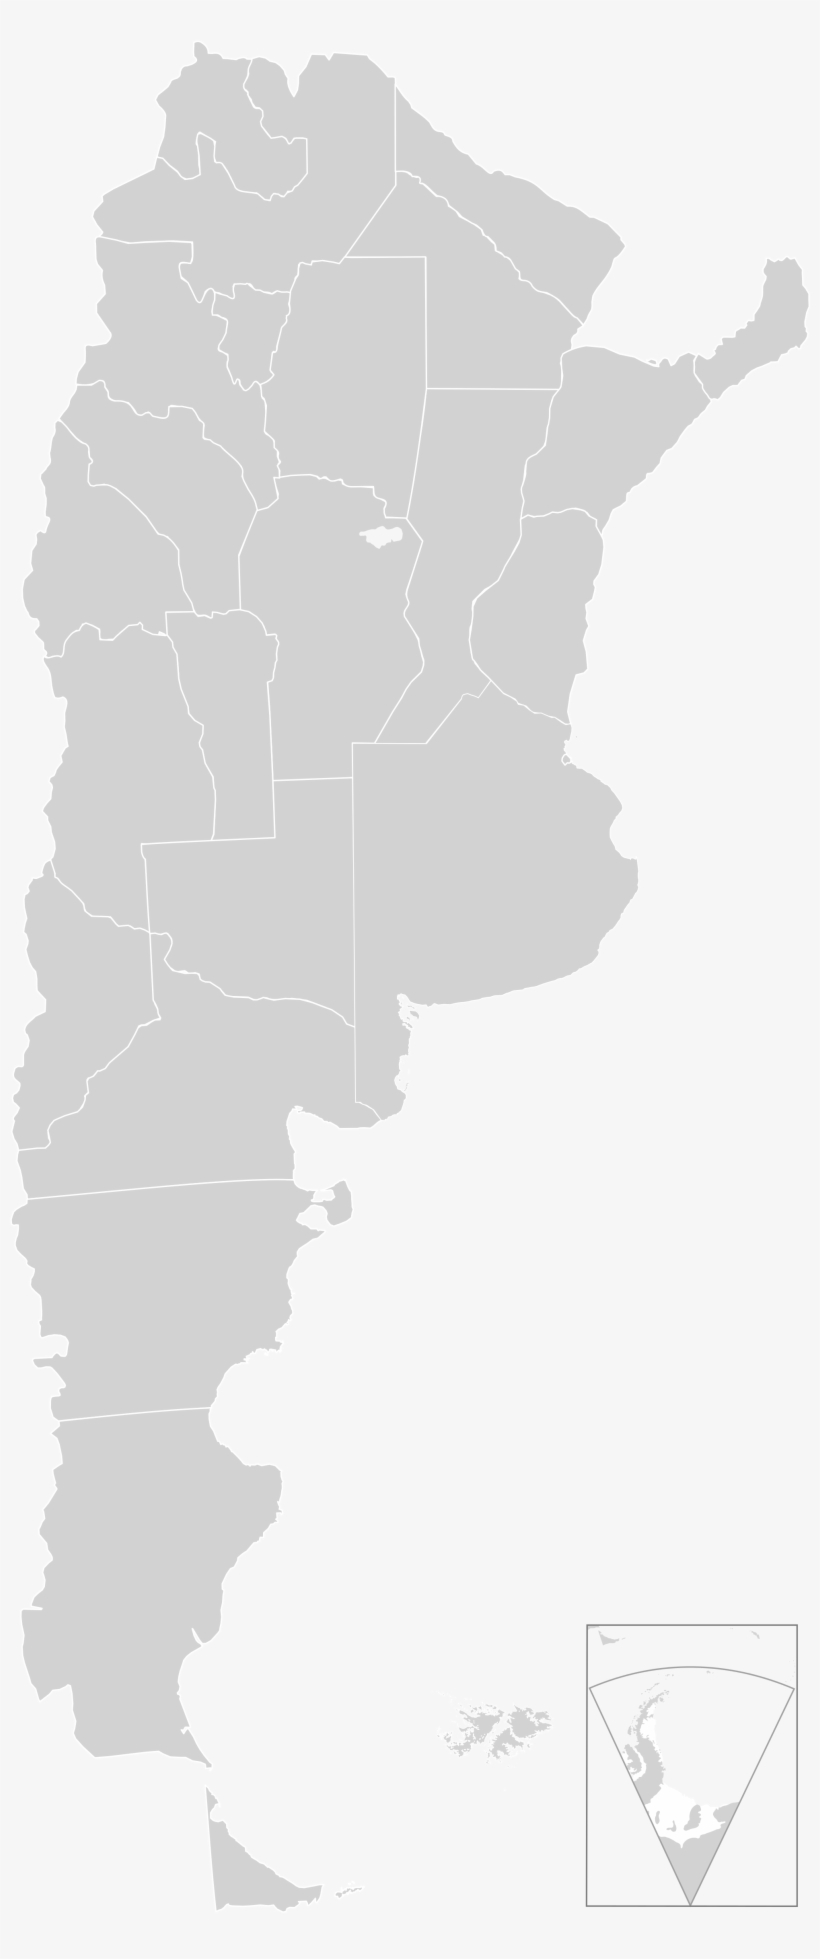 File Blank Svg Wikimedia Commons Open - Major Regions In Argentina, transparent png #8544891